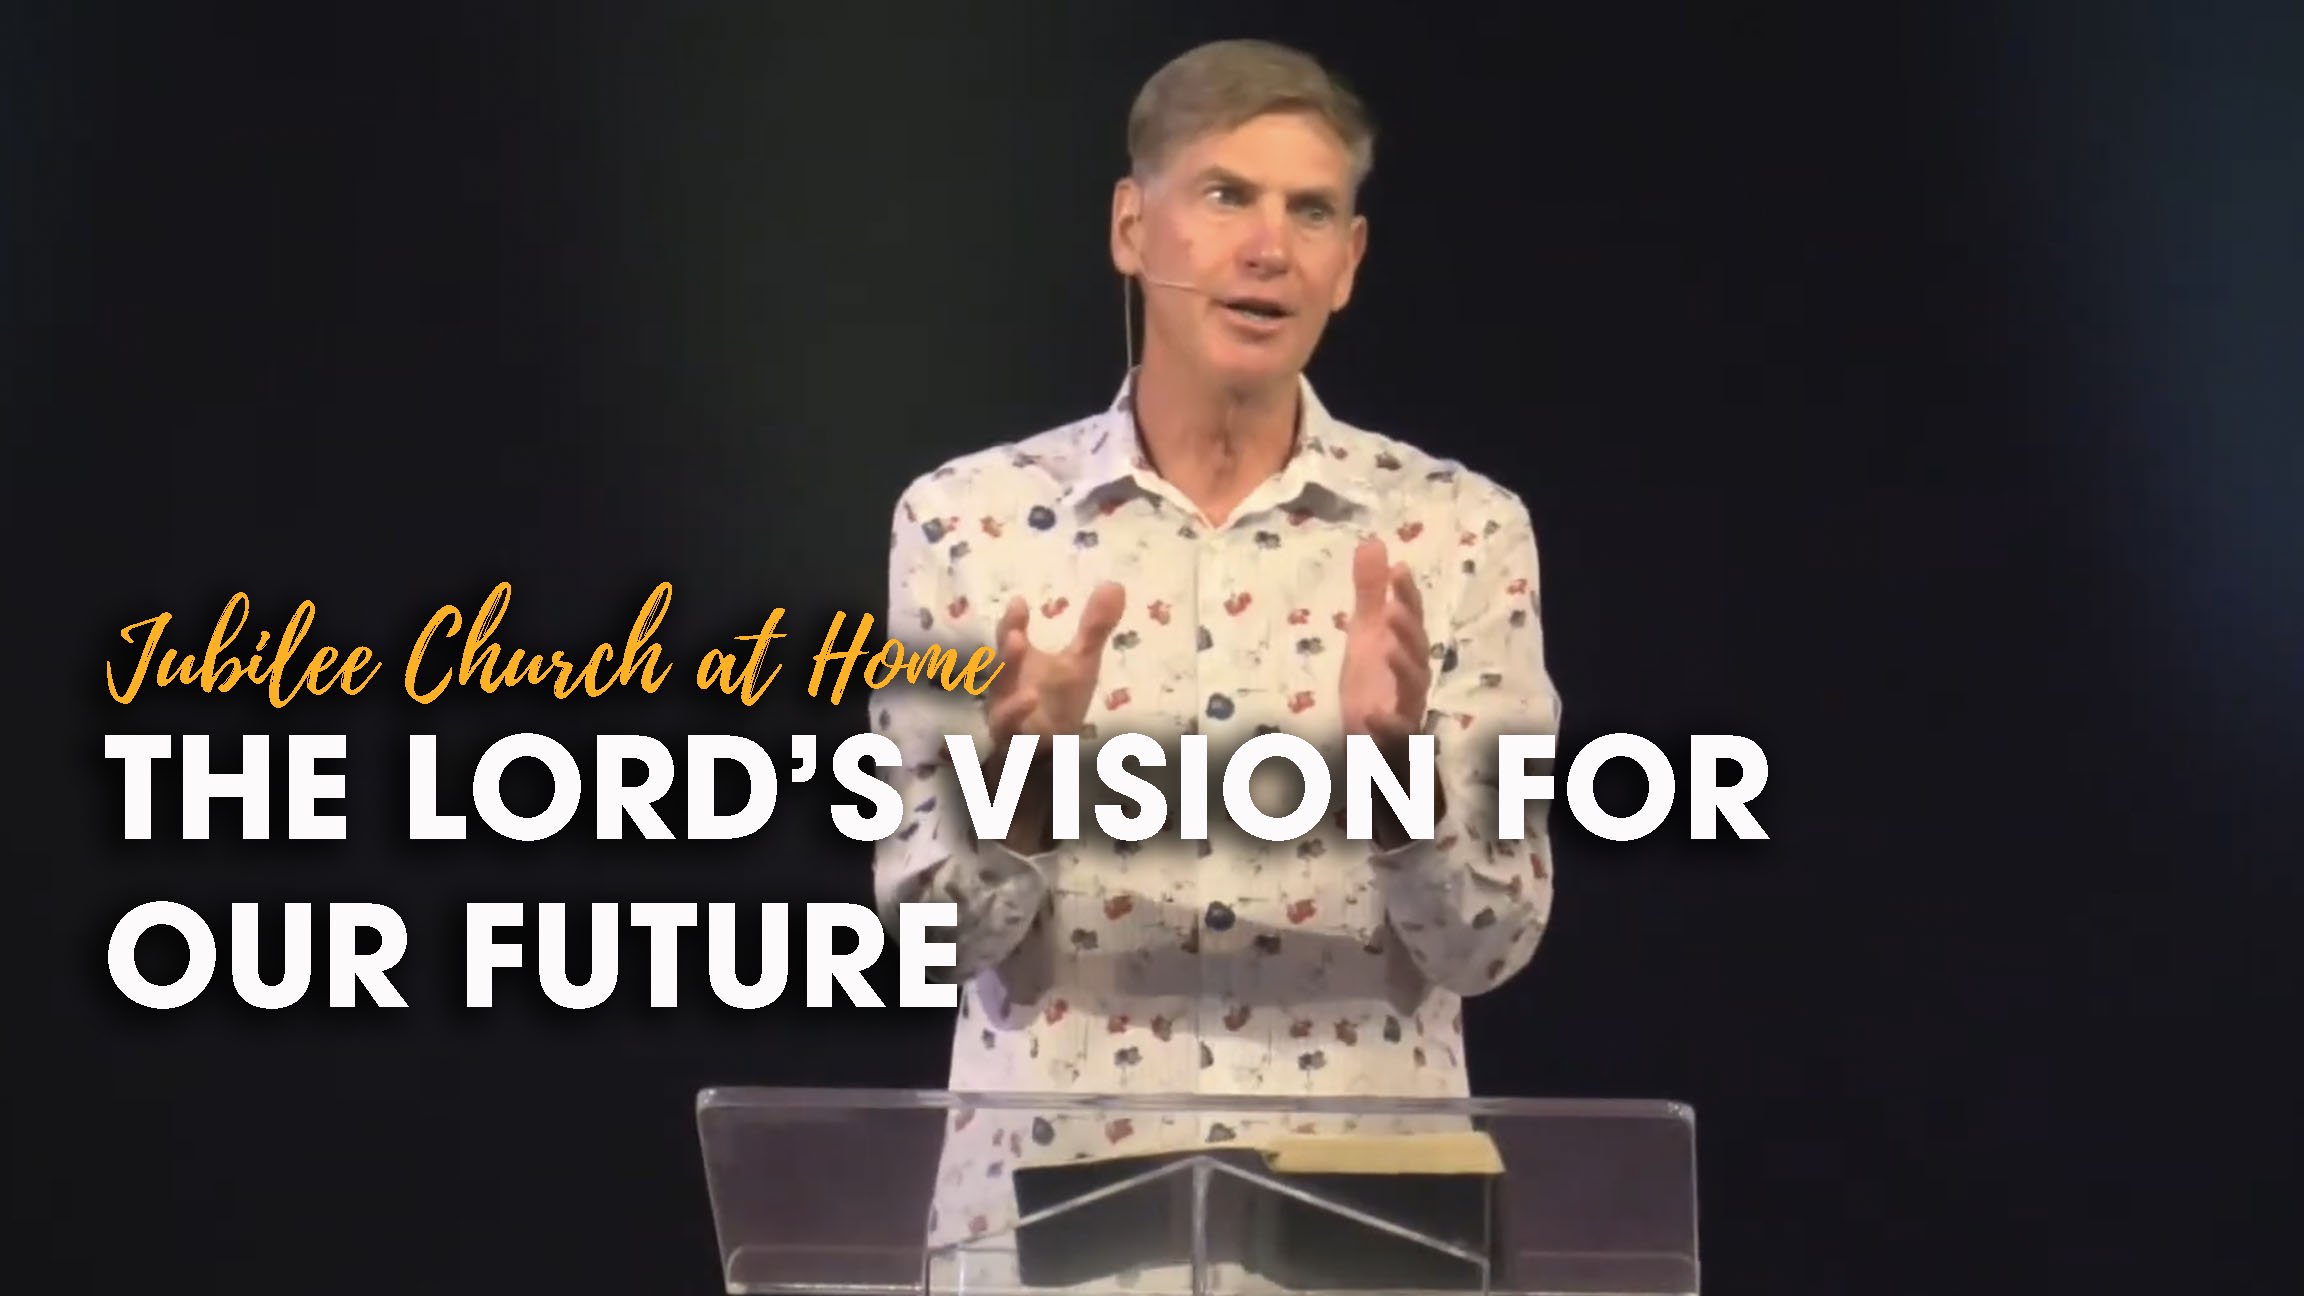 The Lord’s Vision for Our Future